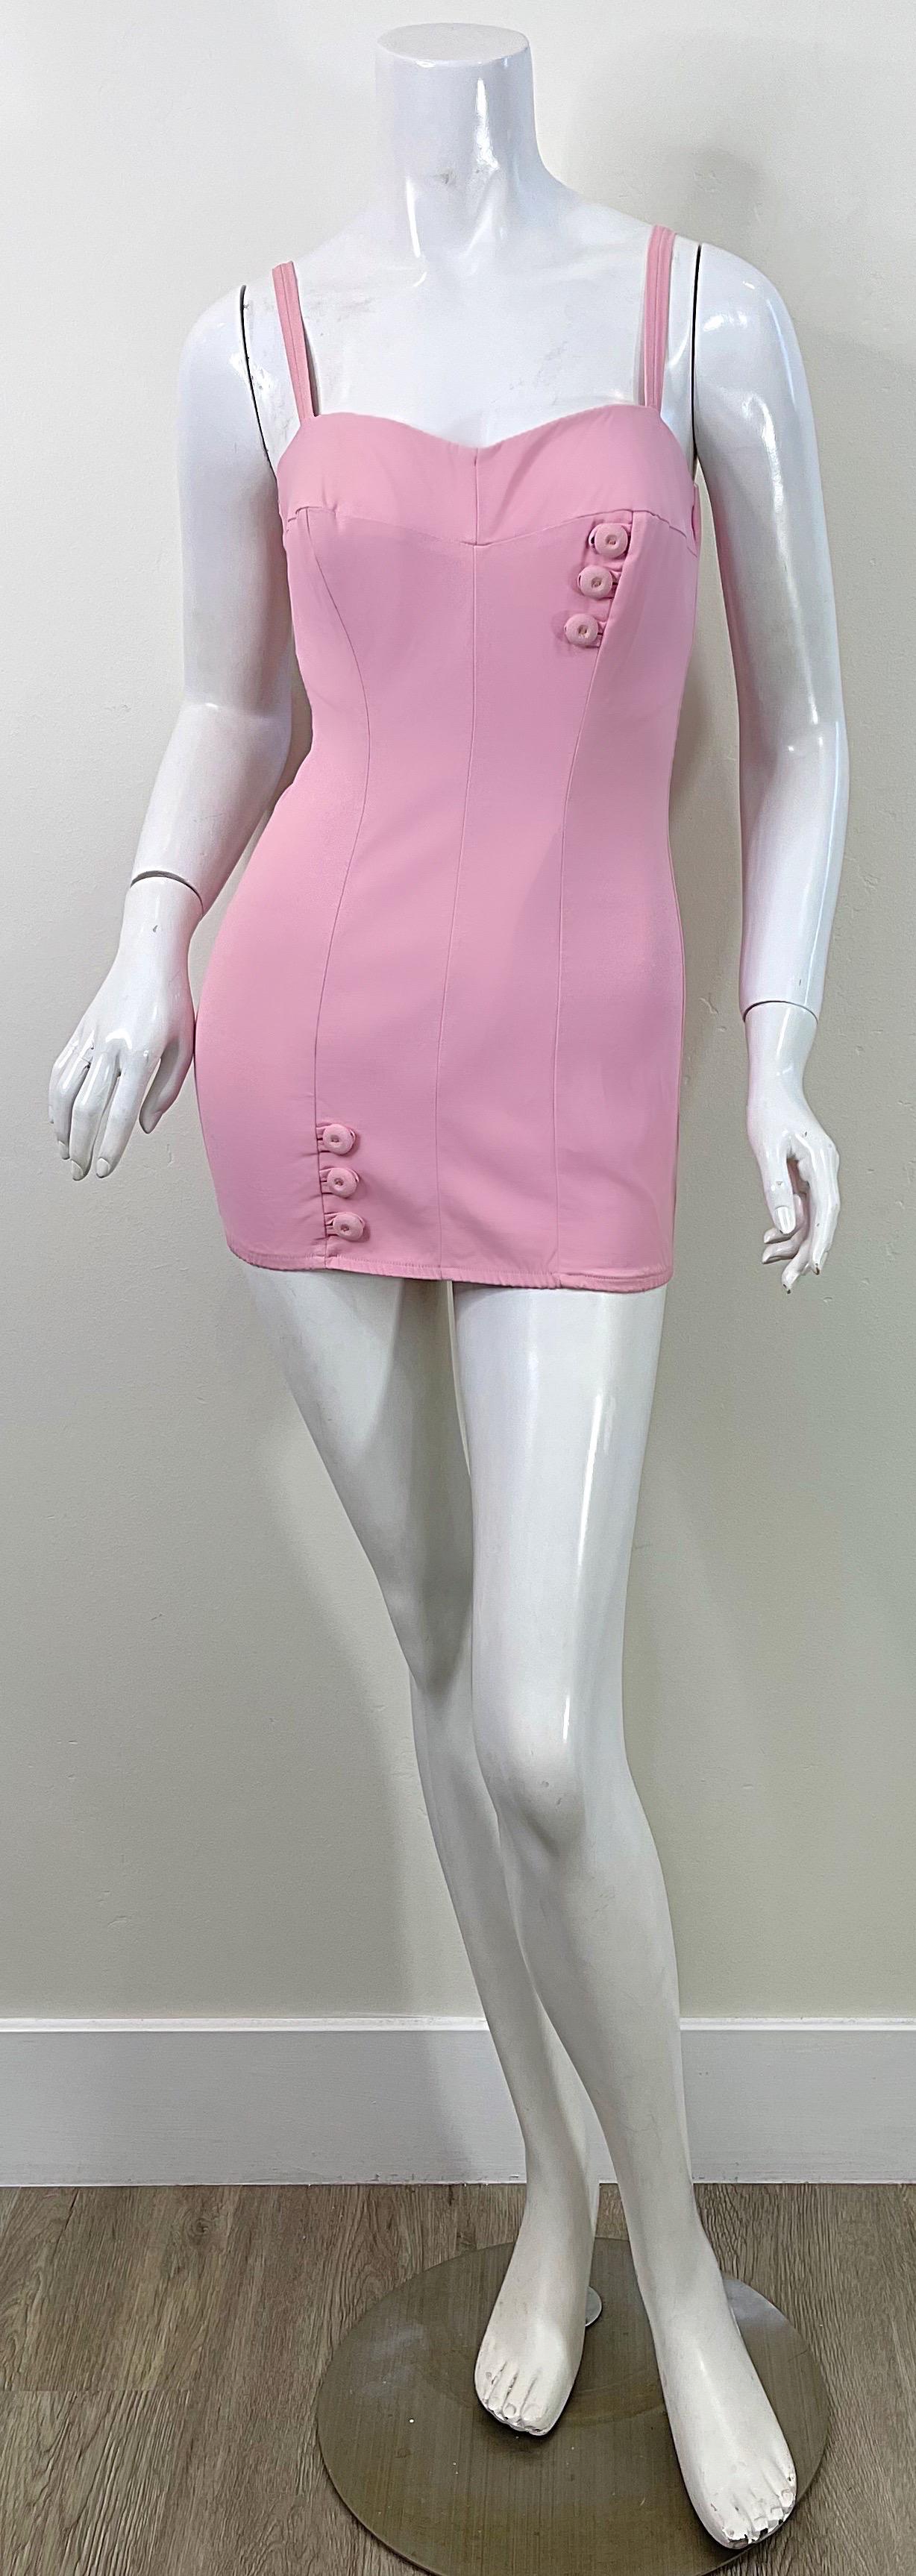 Amazing and rare 1950s MAURICE HANDLER bubblegum pink one piece swimsuit ! Channel your inner Barbie in this museum worthy frock. Features mock buttons at left bust and right leg. Full metal zipper up the back with hook-and-eye closure. 
Perfect for